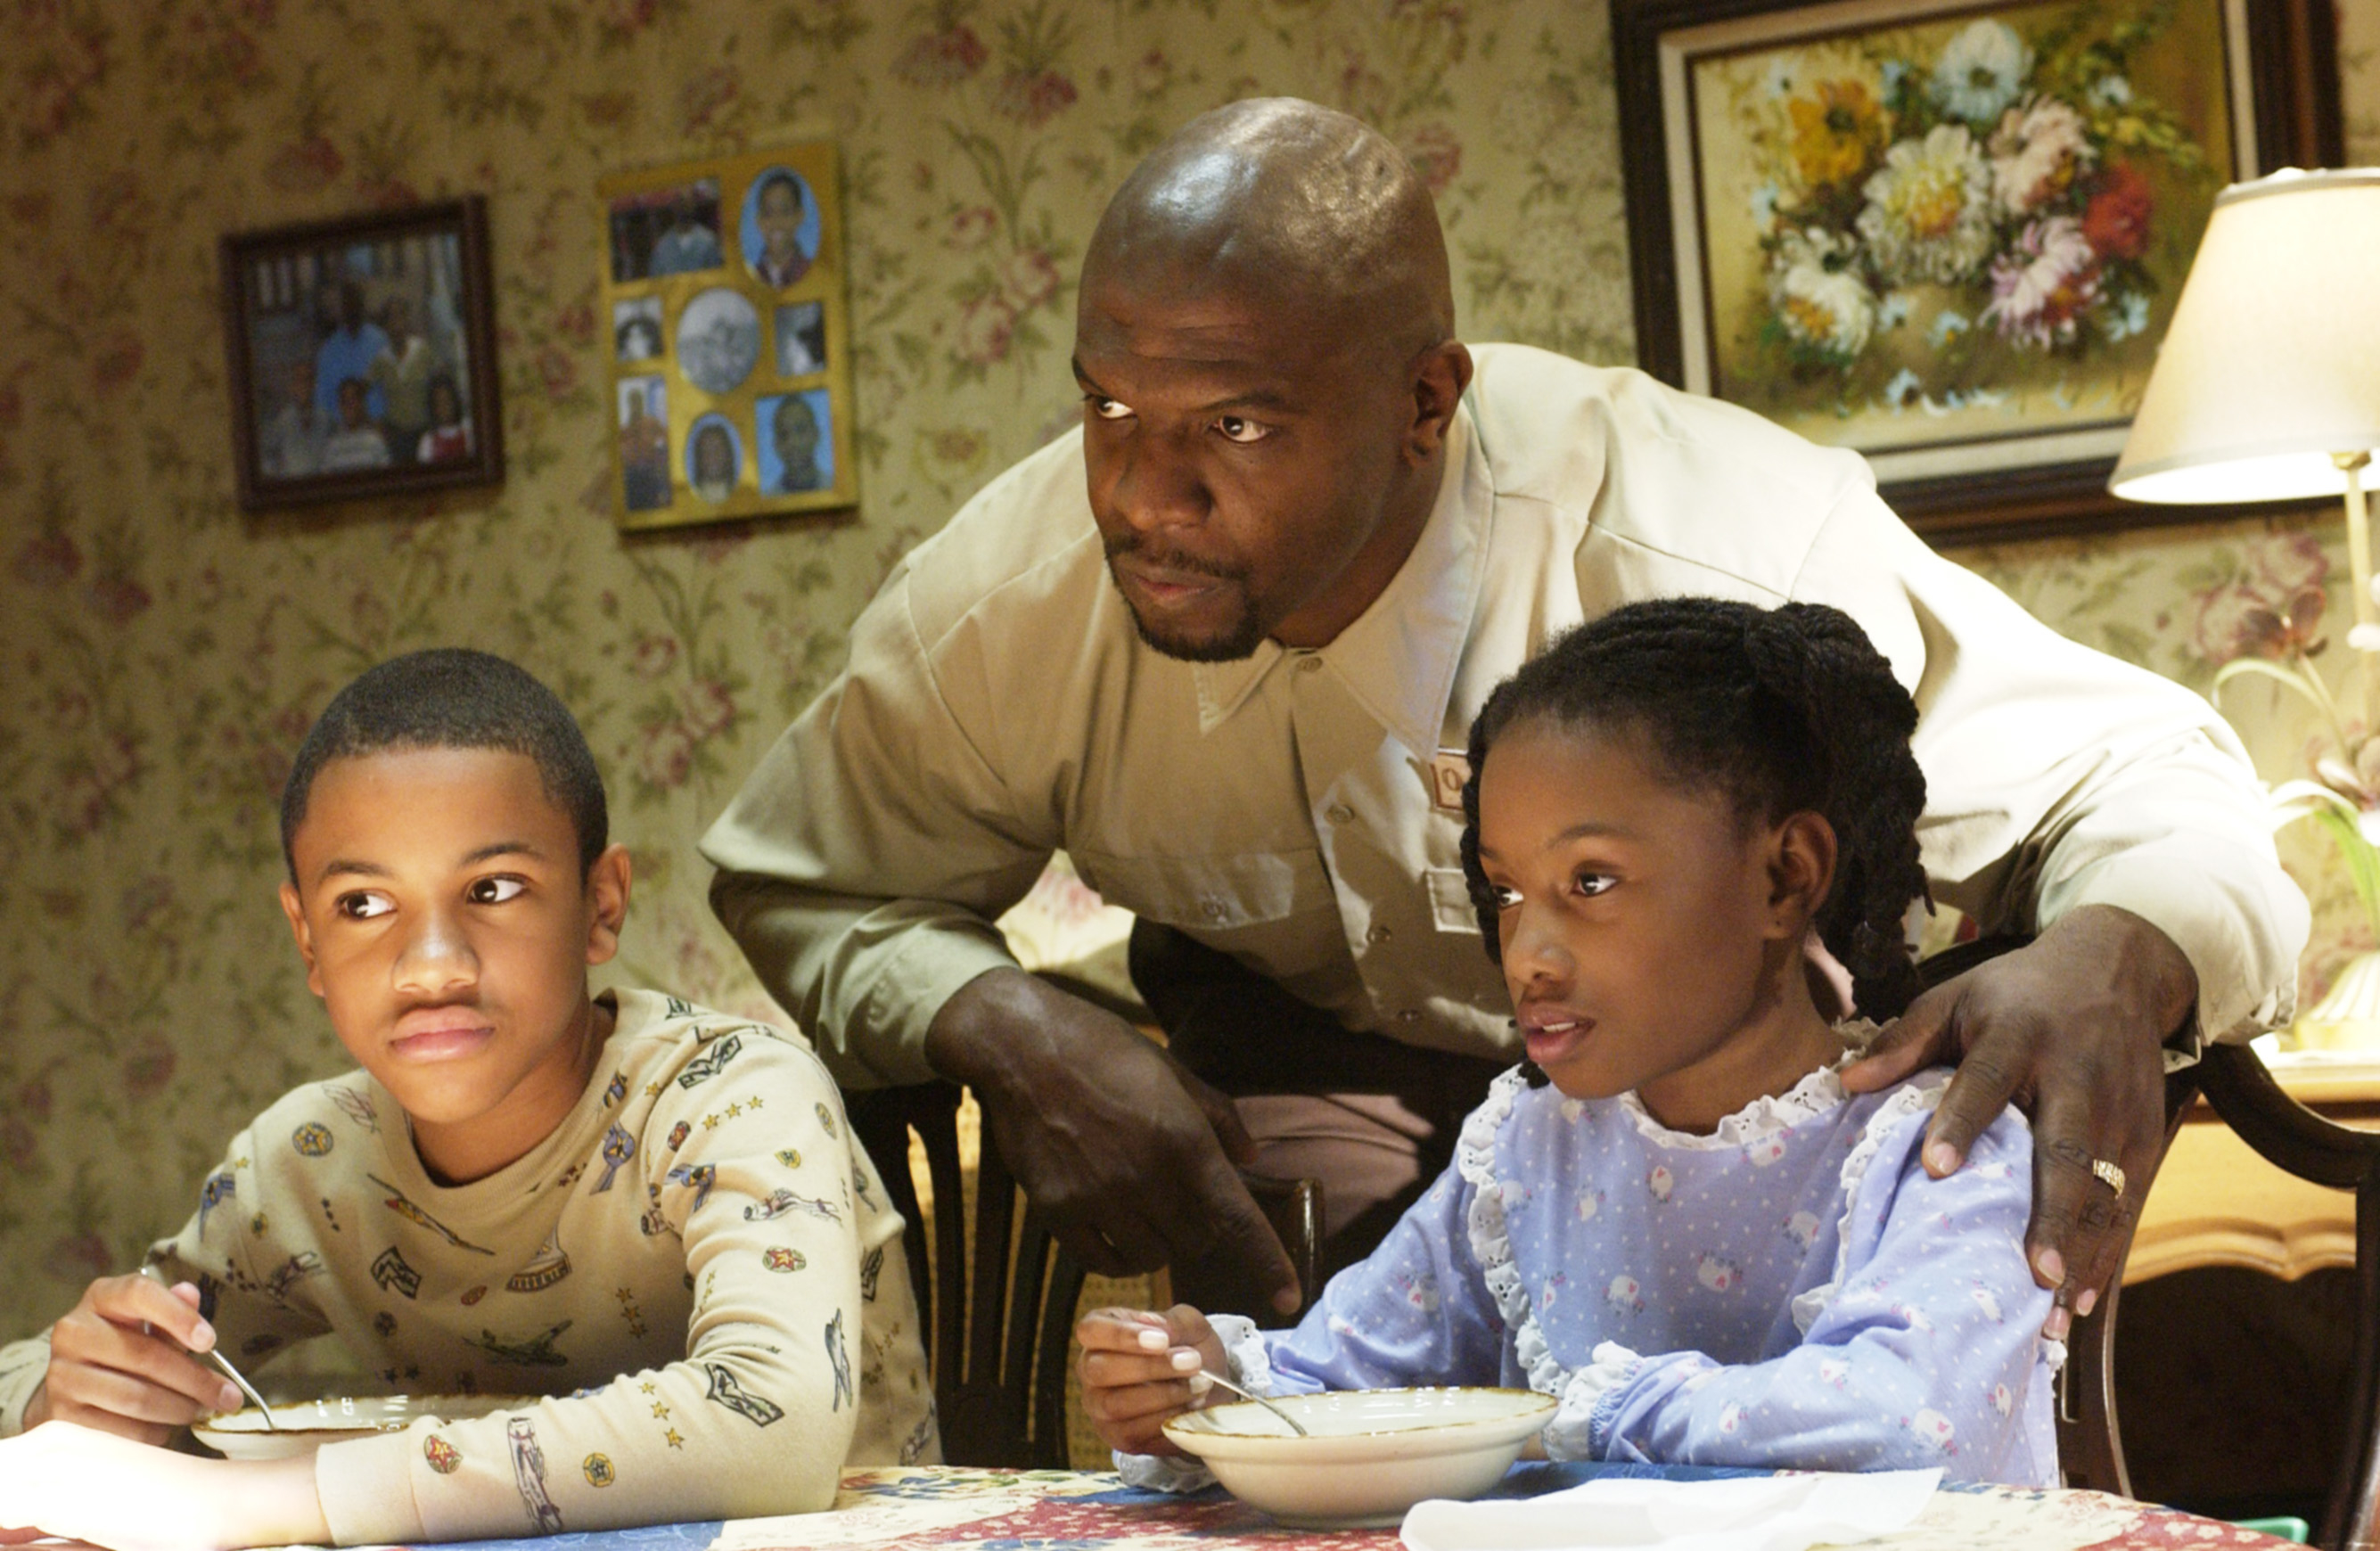 Tequan Richmond, Terry Crews, Imani Hakim at a kitchen table with floral wallpaper and photos hanging in the background